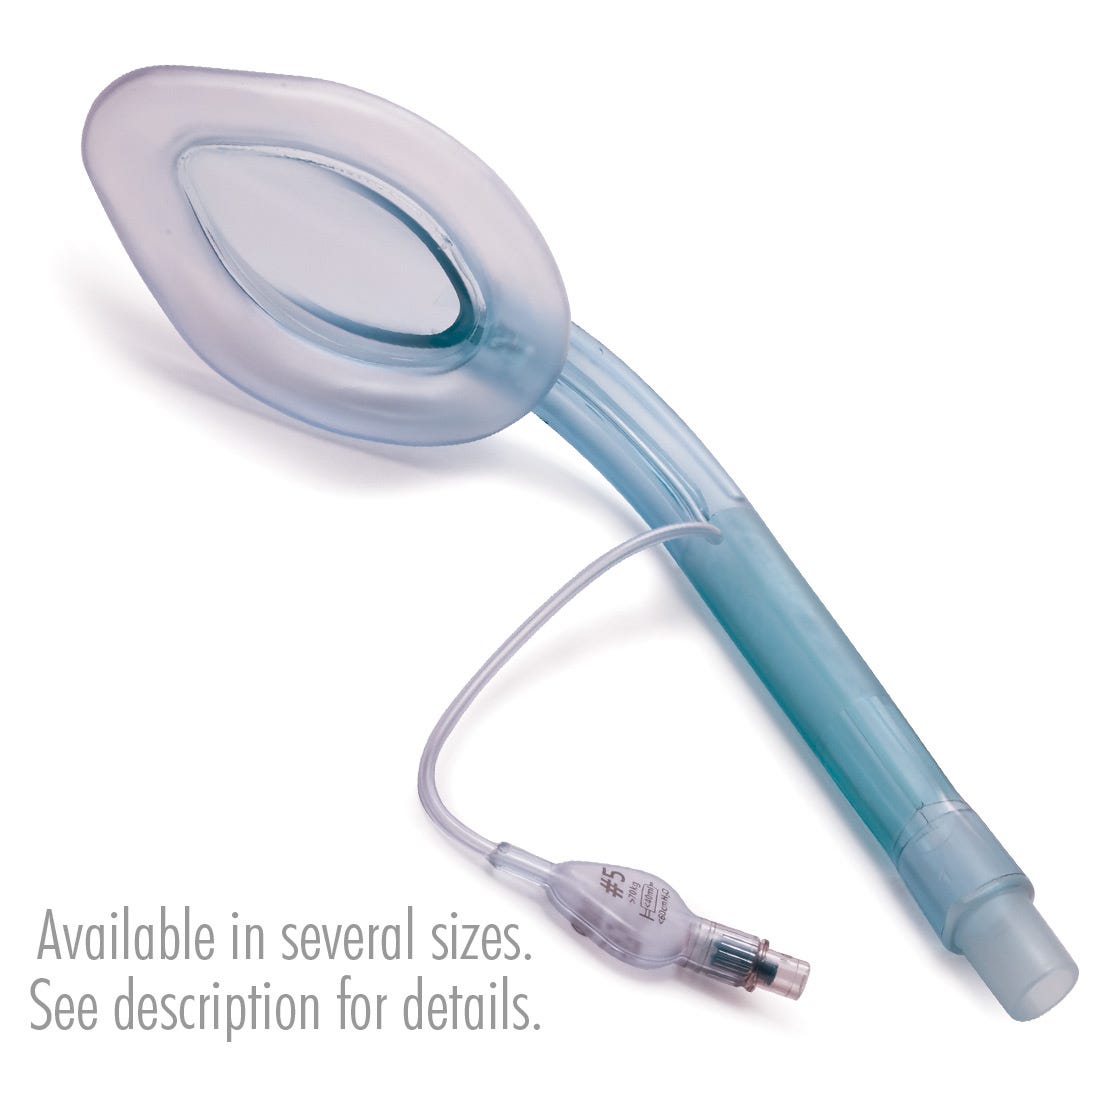 AuraOnce™ Laryngeal Mask Airway, Sterile, Disposable, Small Adult, Size 3. 300-50Kg